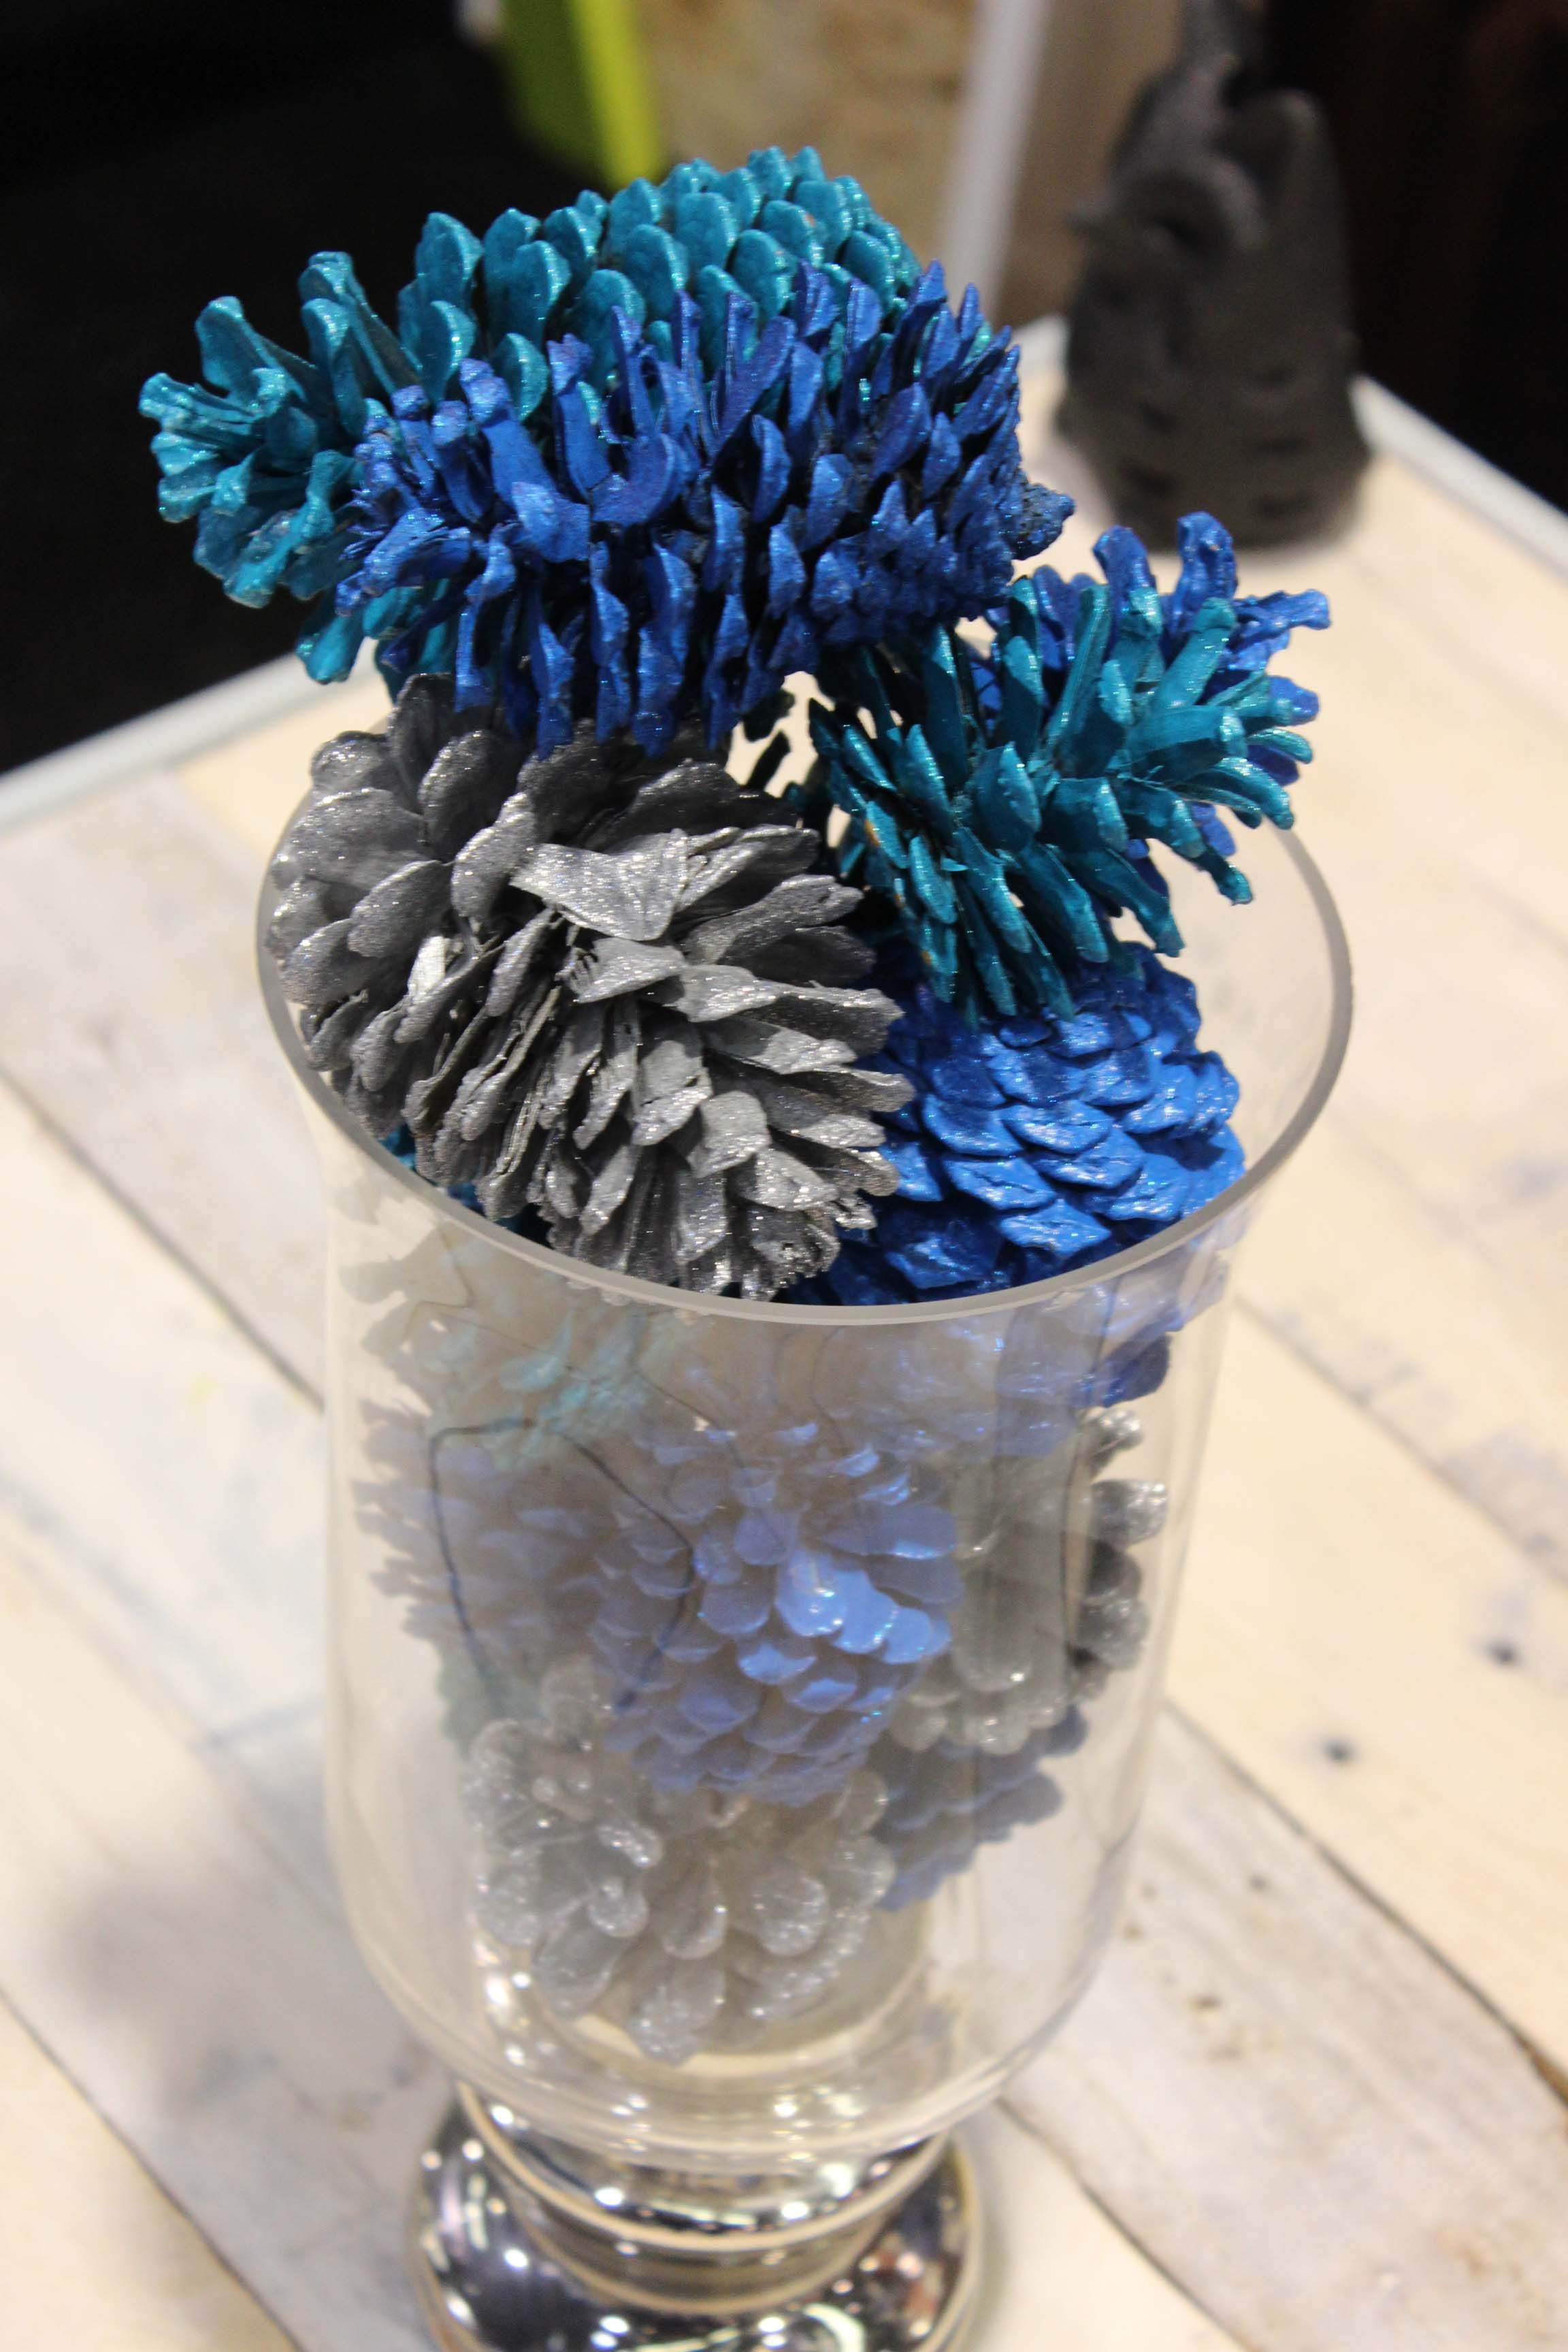 29 Fabulous Vase Filler Ideas for Weddings 2024 free download vase filler ideas for weddings of rust oleum spray painted glitter pine cones as a vase filler for with regard to rust oleum spray painted glitter pine cones as a vase filler